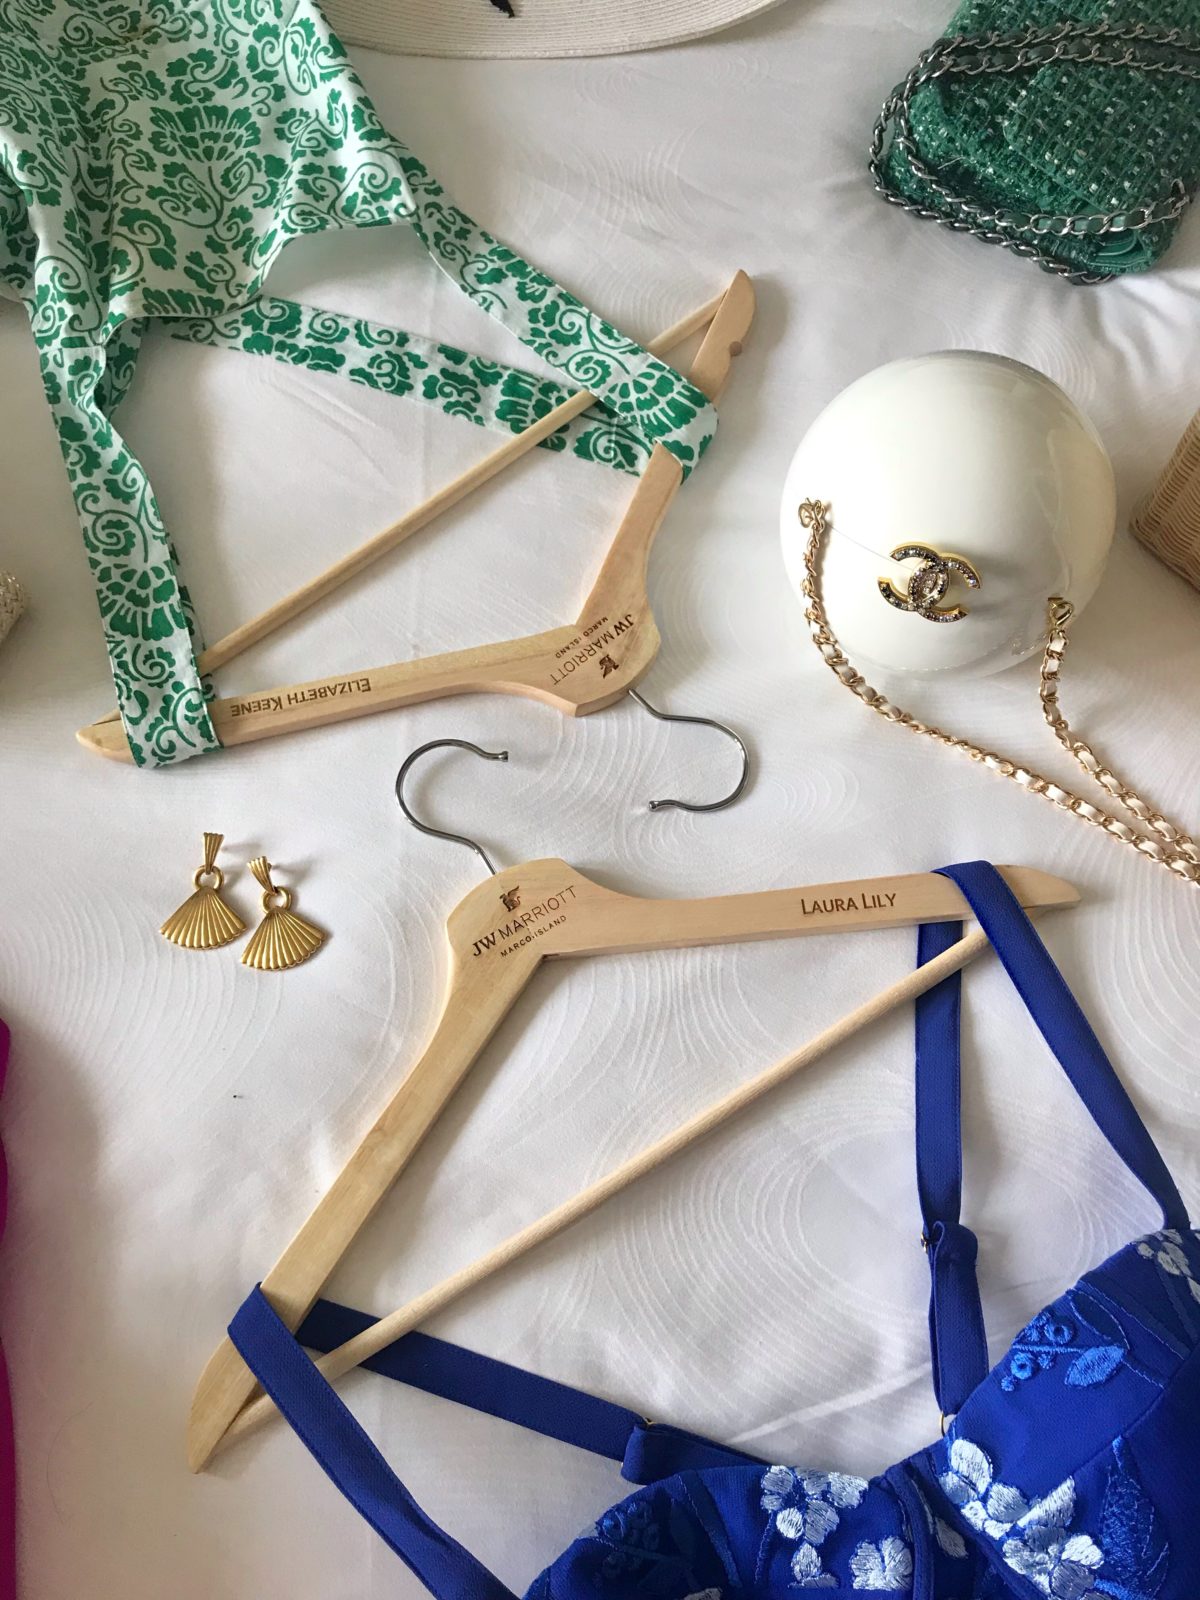 JW Marriott Marco Island by Luxury Travel Blogger Laura Lily: image of a Channel purse, gold drop earrings, and two dresses laid out on a bed.